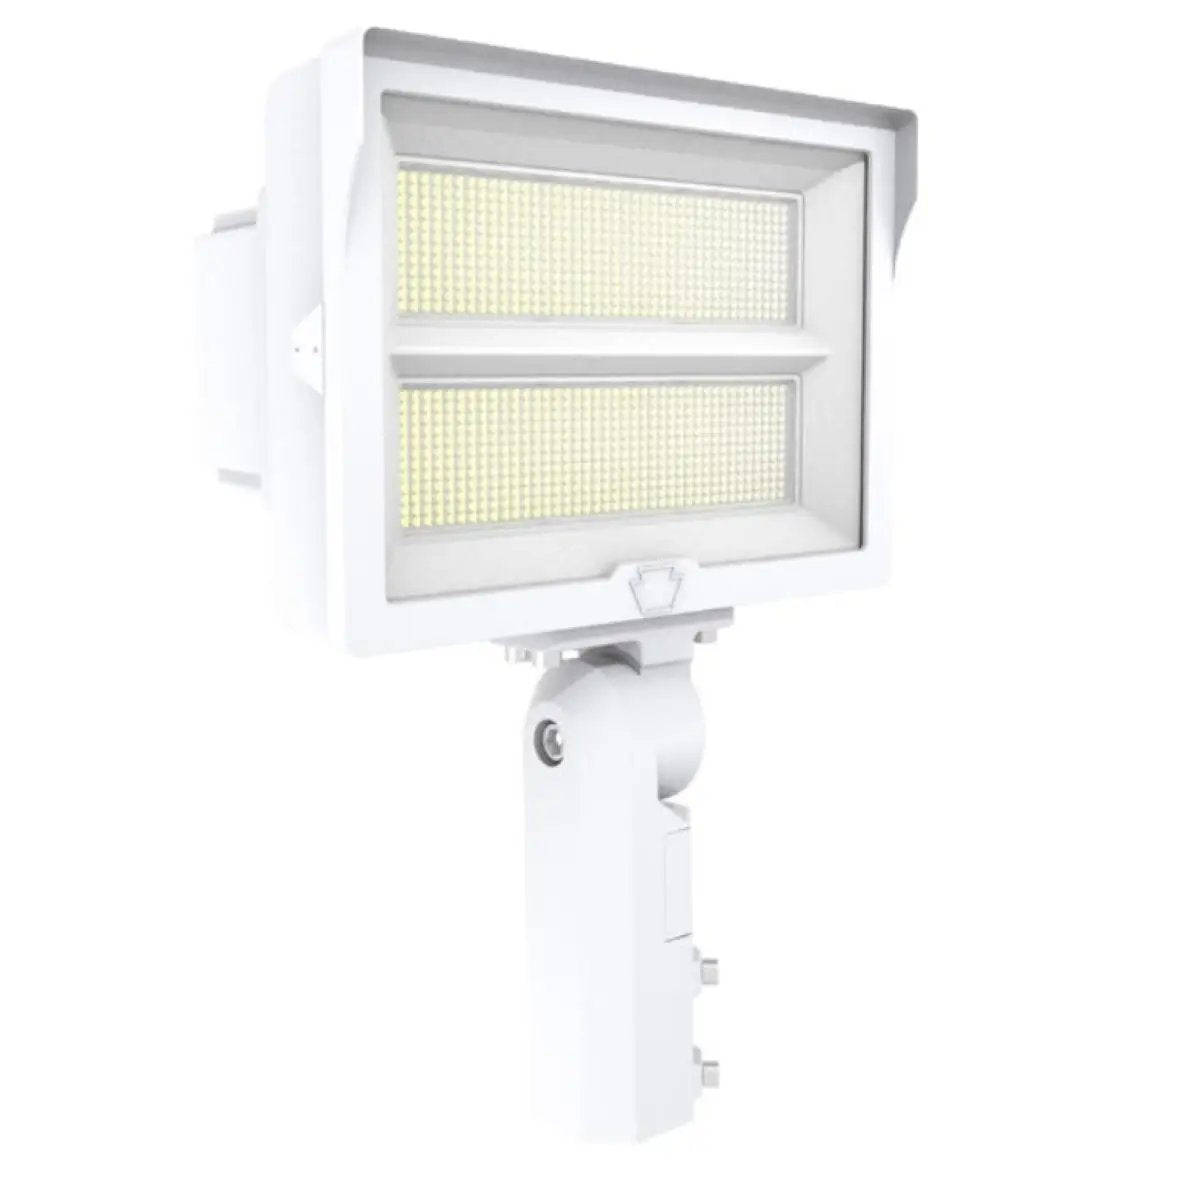 Floodlight with adjustable color temperature and dual mounting options, providing 29820-40600 lumens of tunable white light. Ideal for spacious areas like parking lots, building facades, or recreation venues. Dimmable and includes a replaceable photocell for dusk-to-dawn operation. Brand: Keystone Technologies.